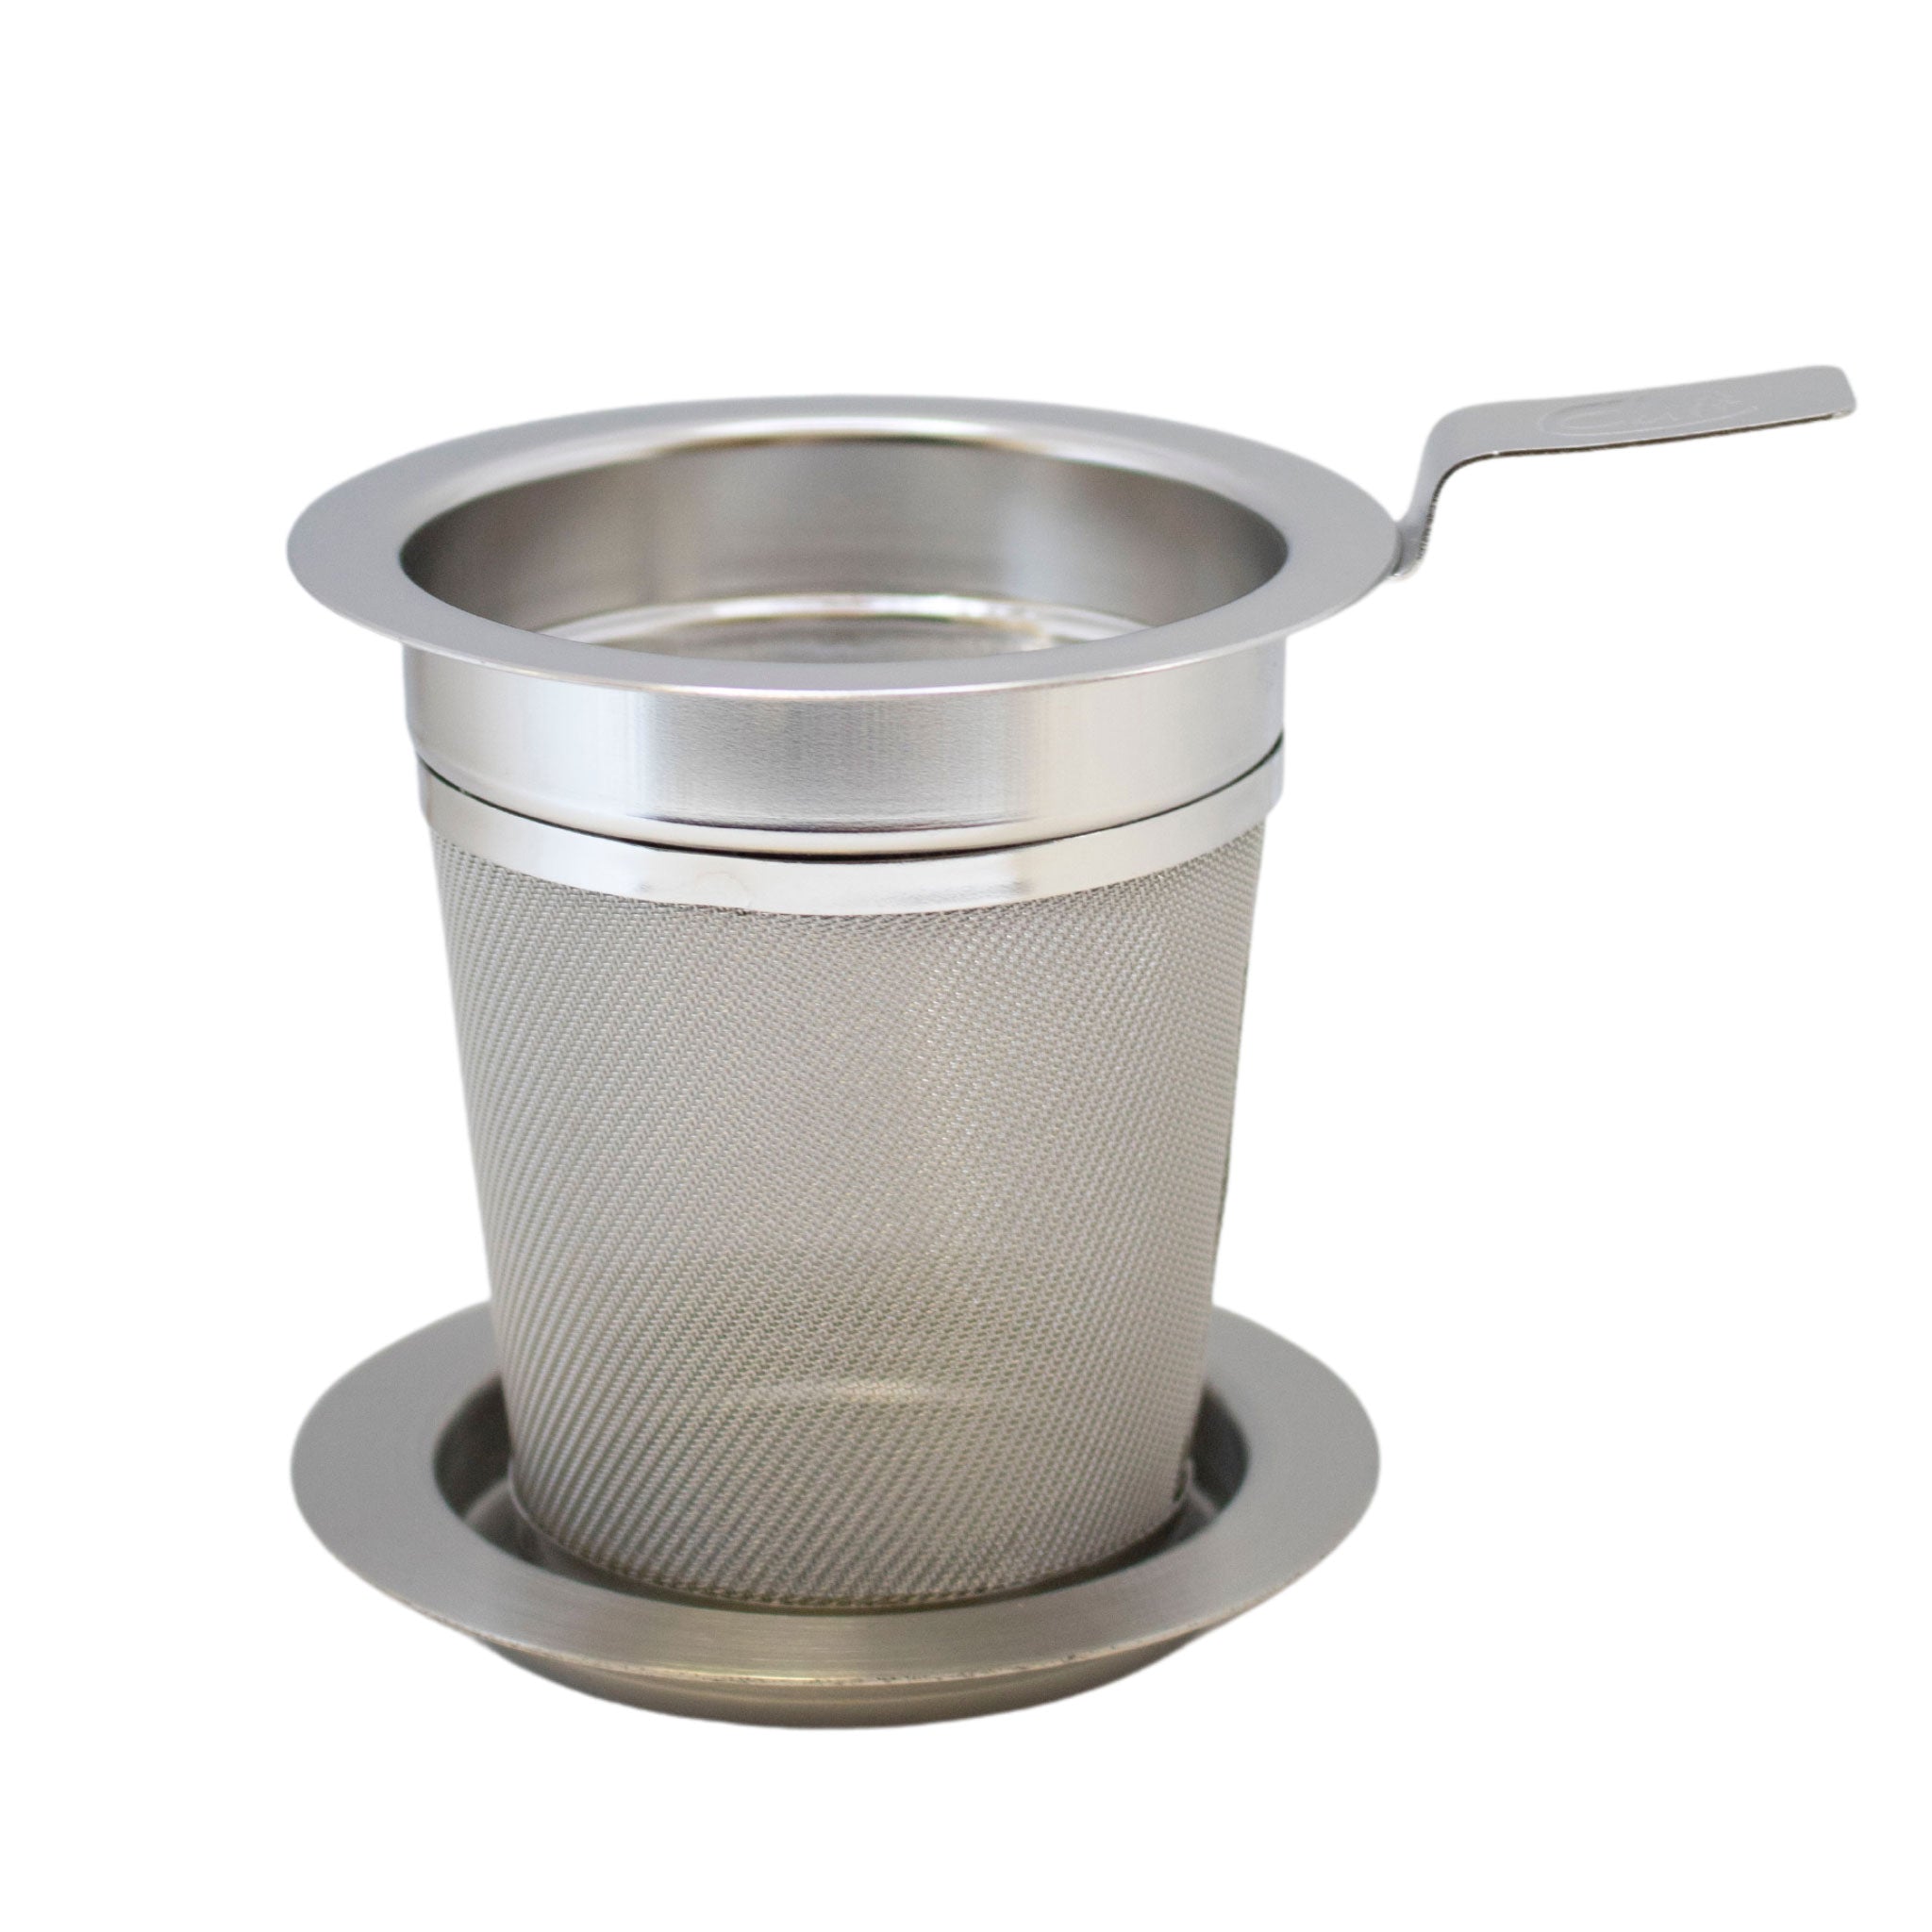 Stainless Steel Tea Filter with lid